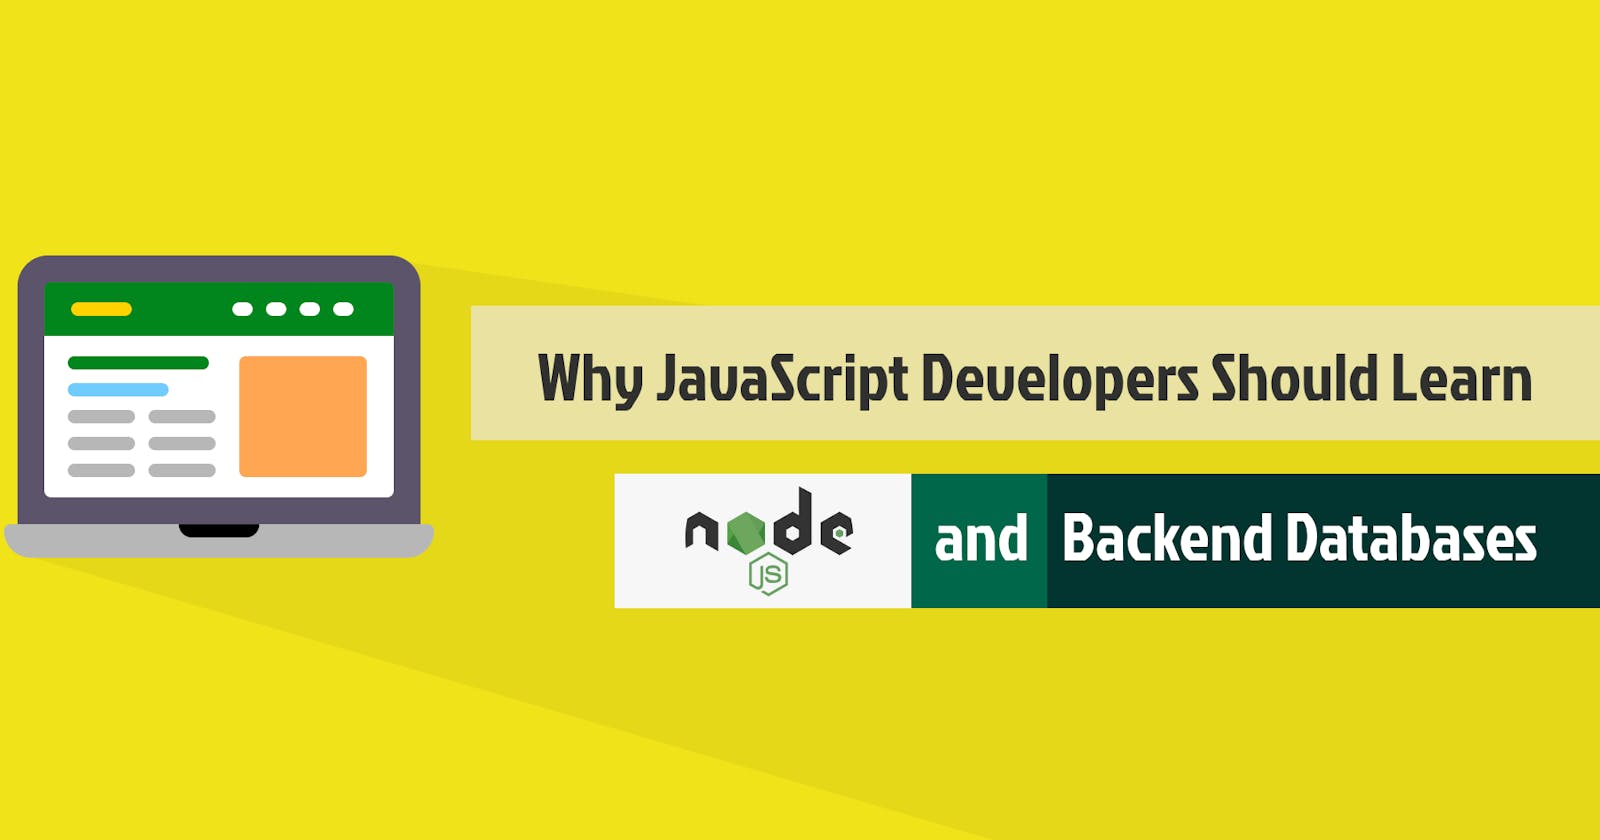 Why JavaScript Developers Should Learn Node.js and Backend Databases